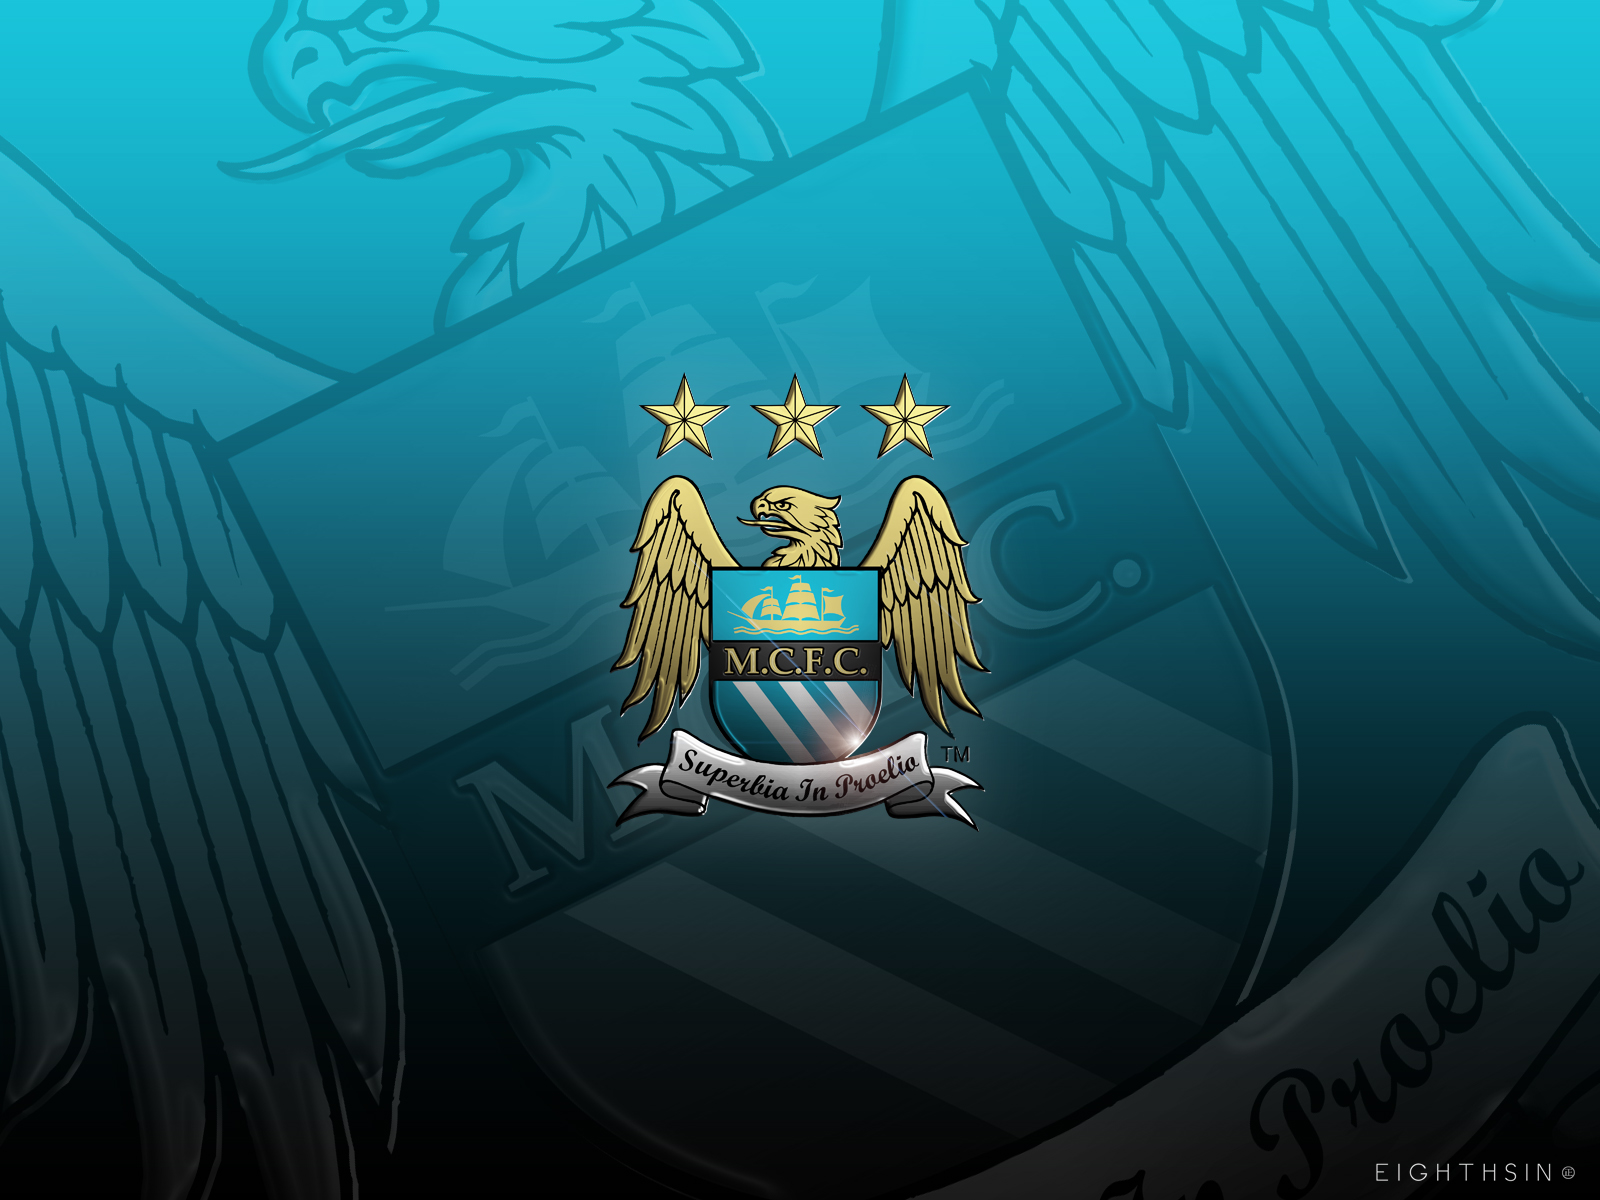 Tags Man City Wallpaper Pictures Manchester HD Background